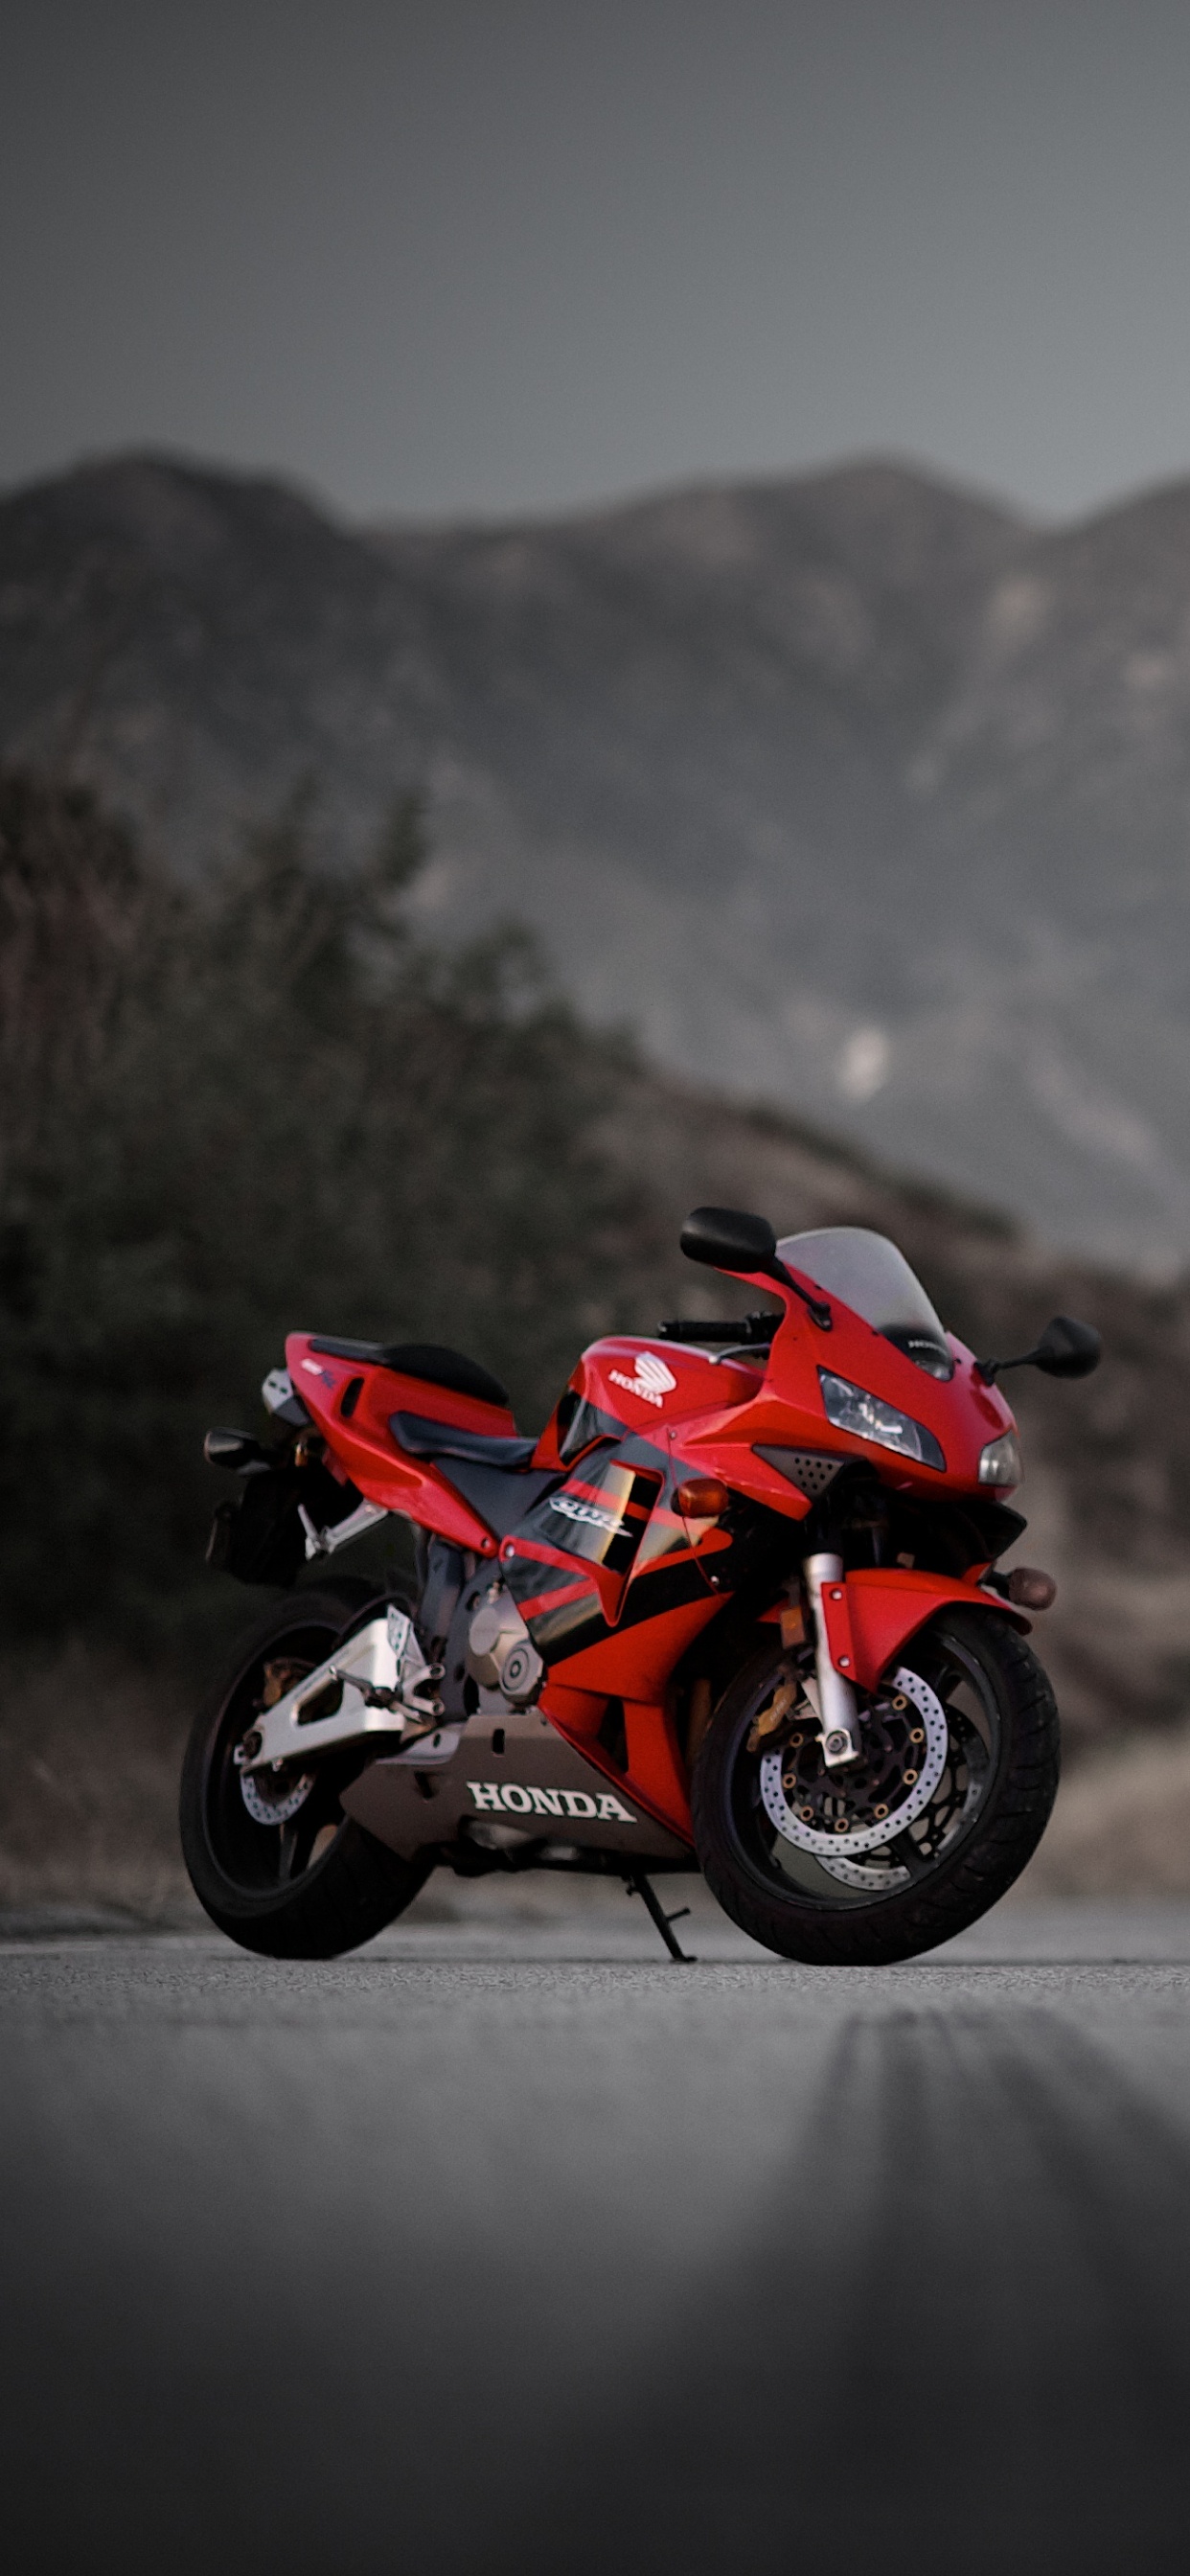 Red and Black Sports Bike on Road During Daytime. Wallpaper in 1242x2688 Resolution